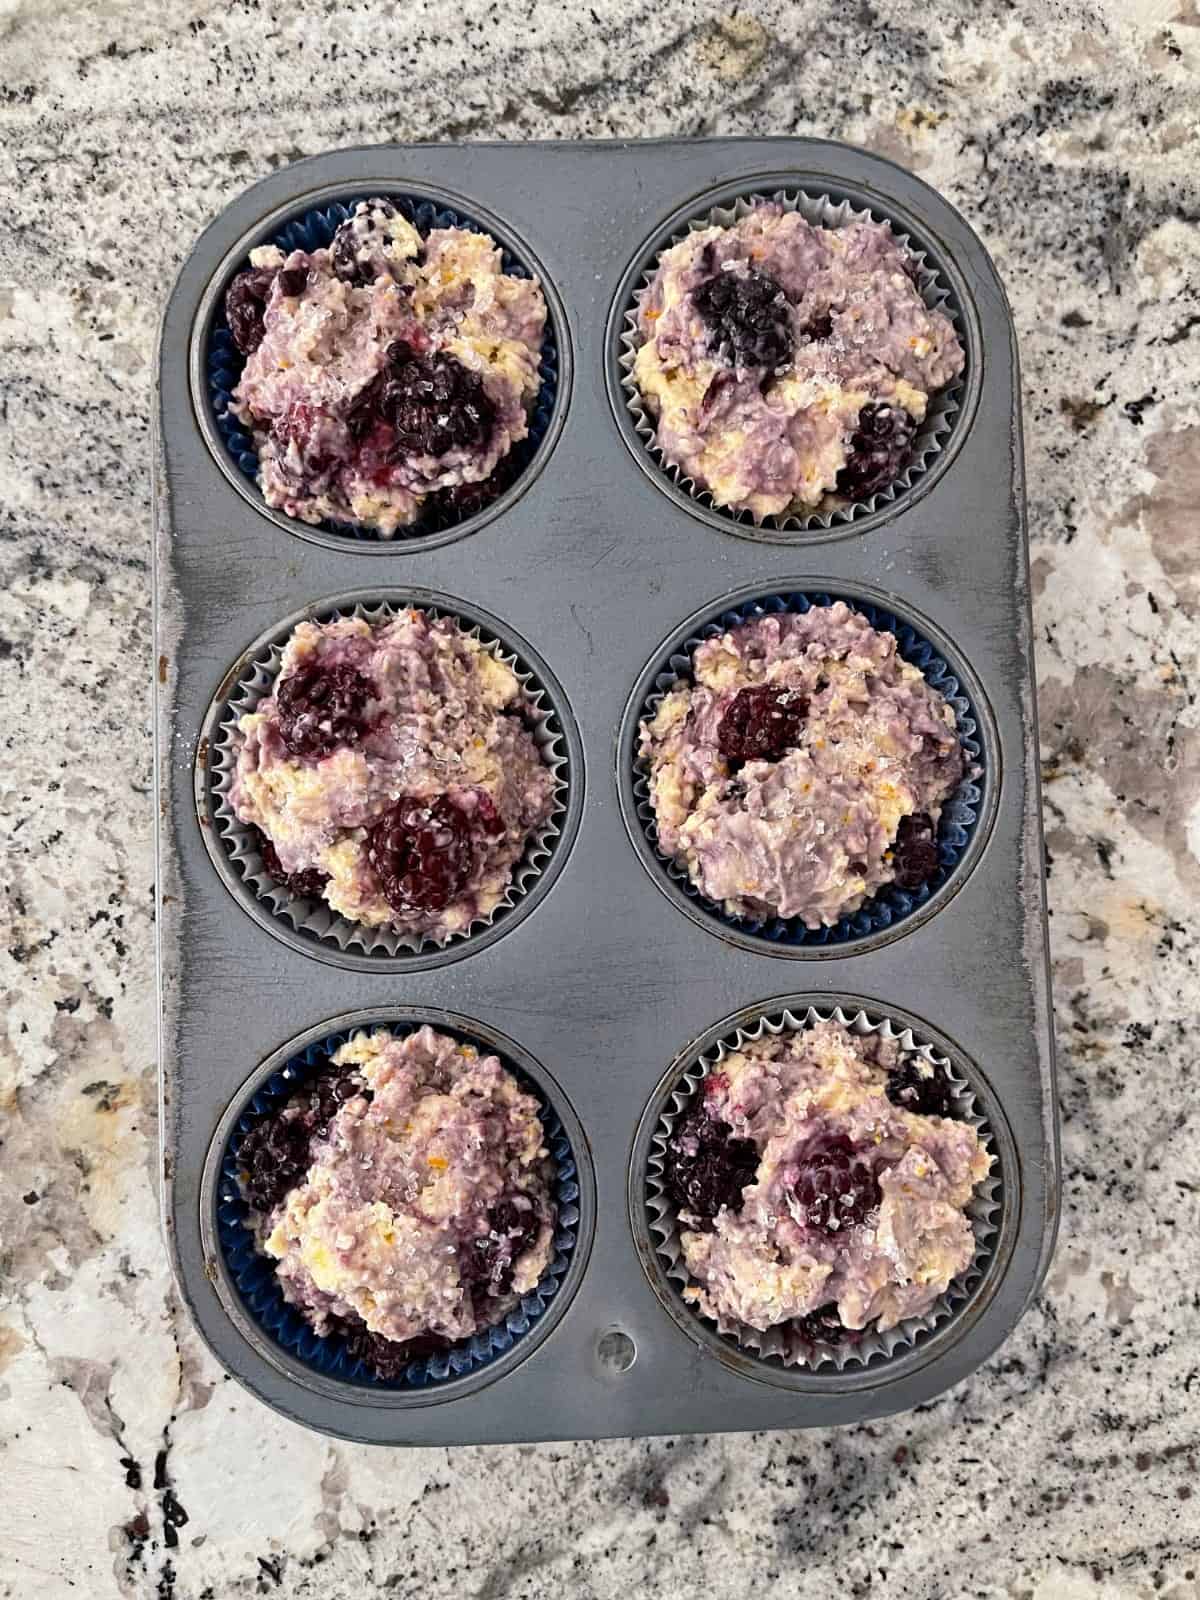 Unbaked blackberry muffins in muffin pan.